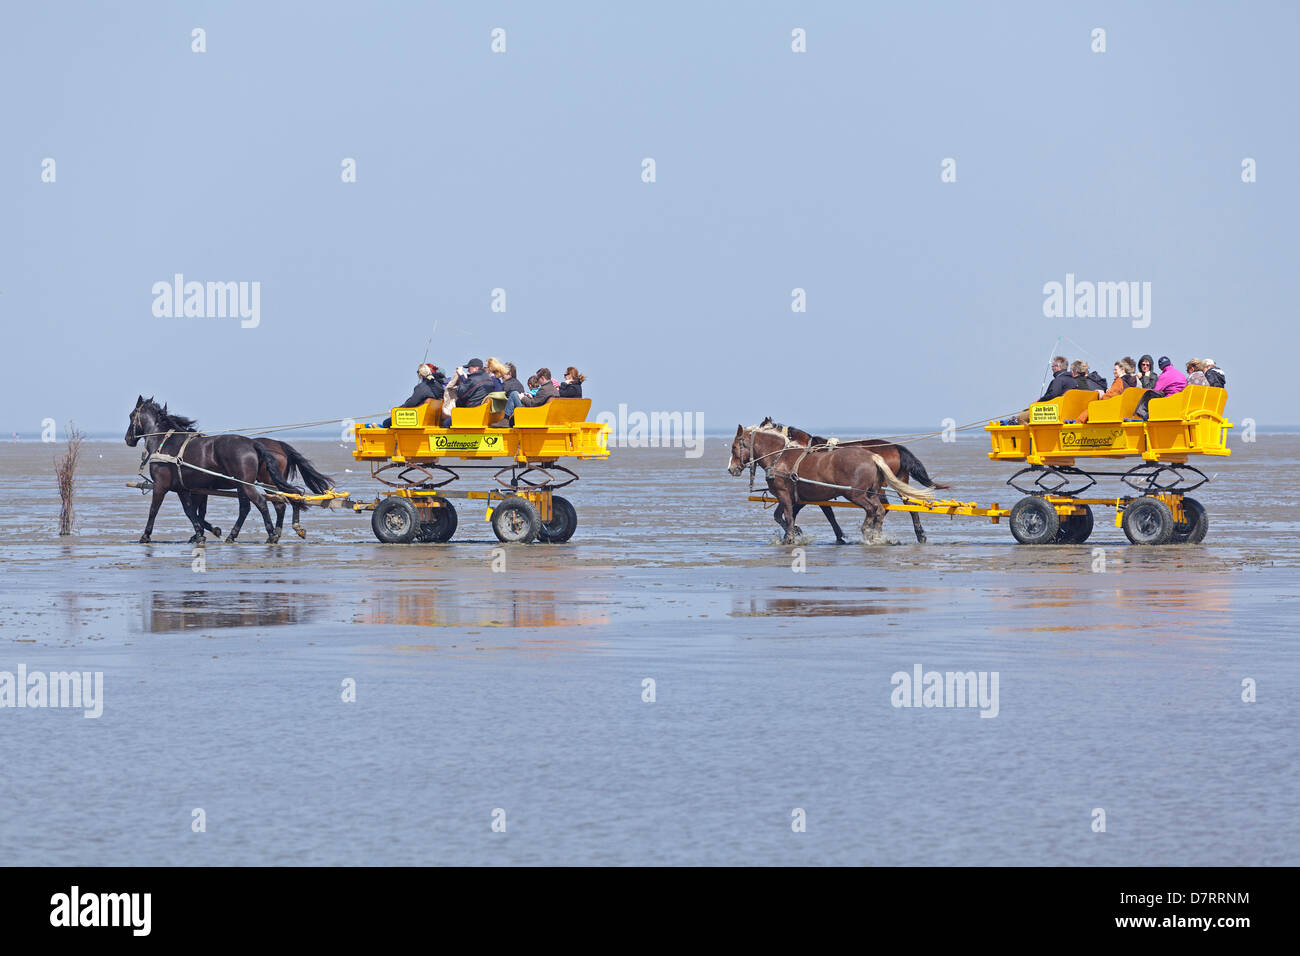 going through the intertidal mudflats by horse-drawn carriages near Duhne, Cuxhaven, Lower Saxony, Germany Stock Photo